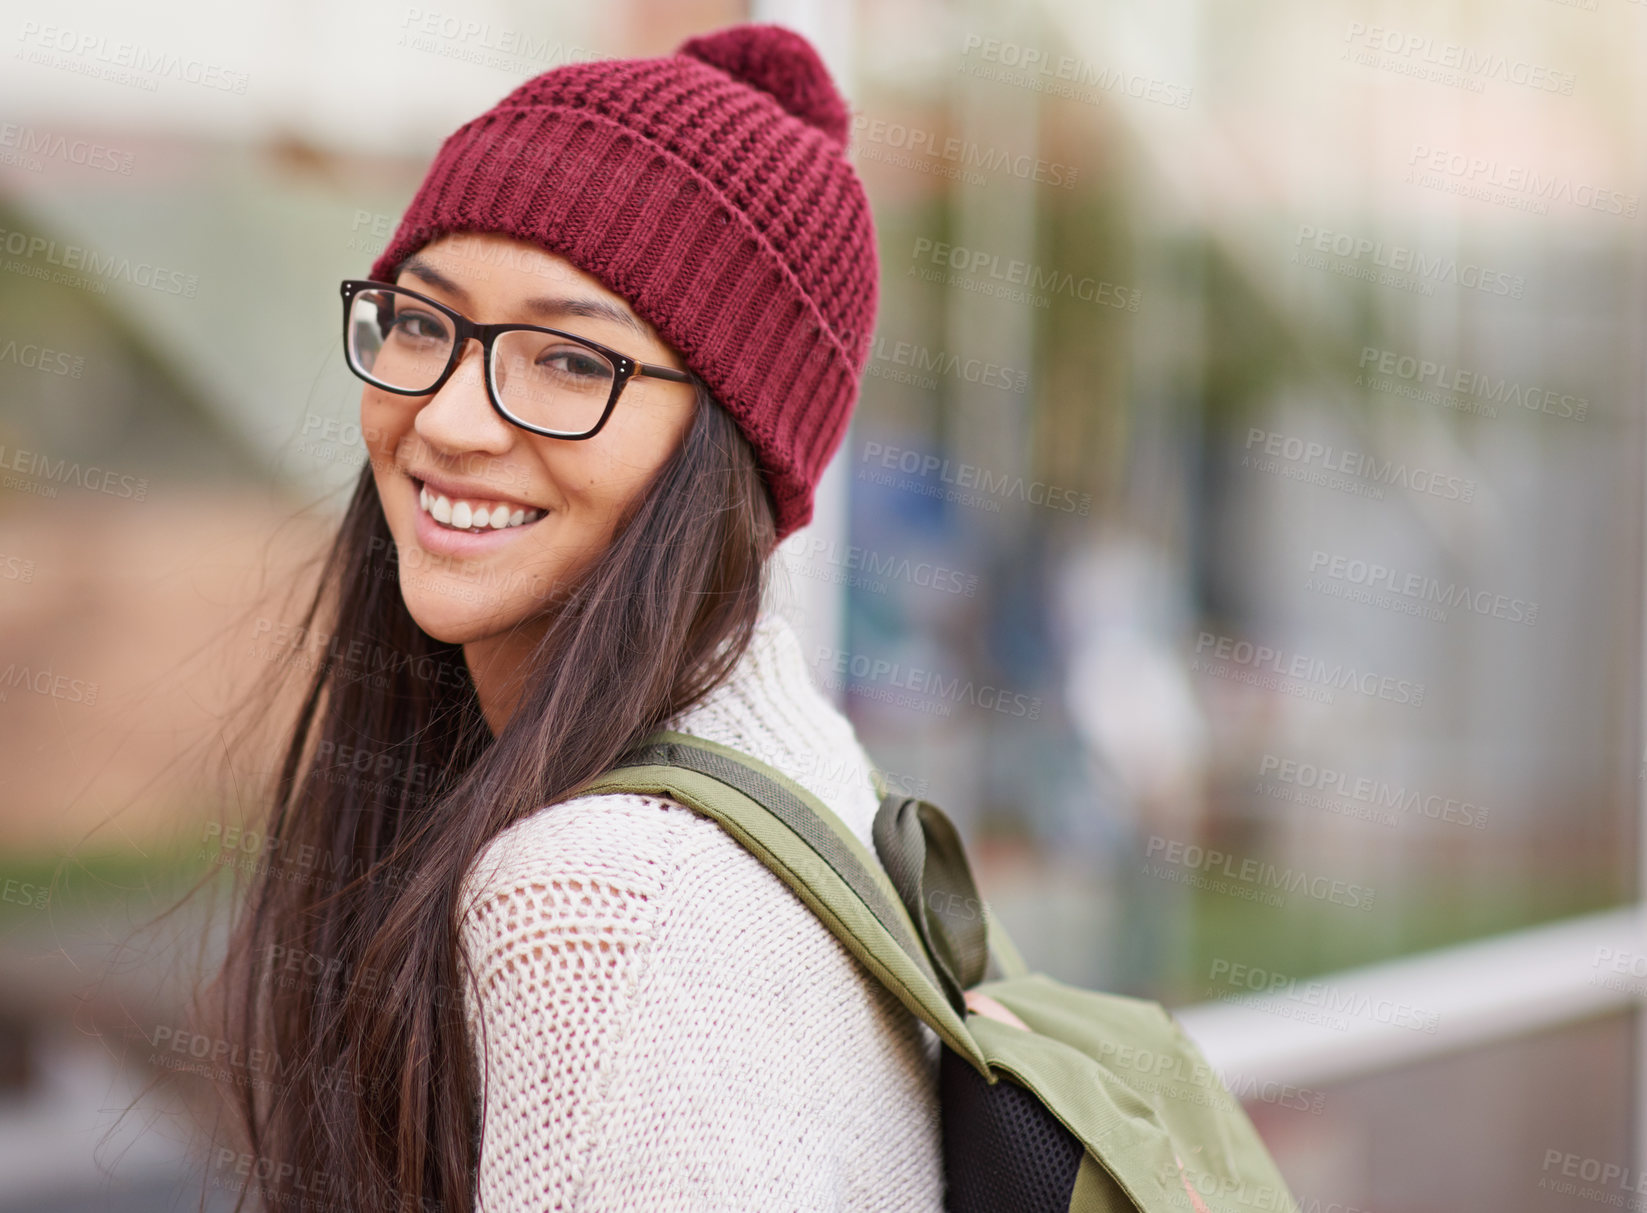 Buy stock photo Cropped shot of a female university student on campus